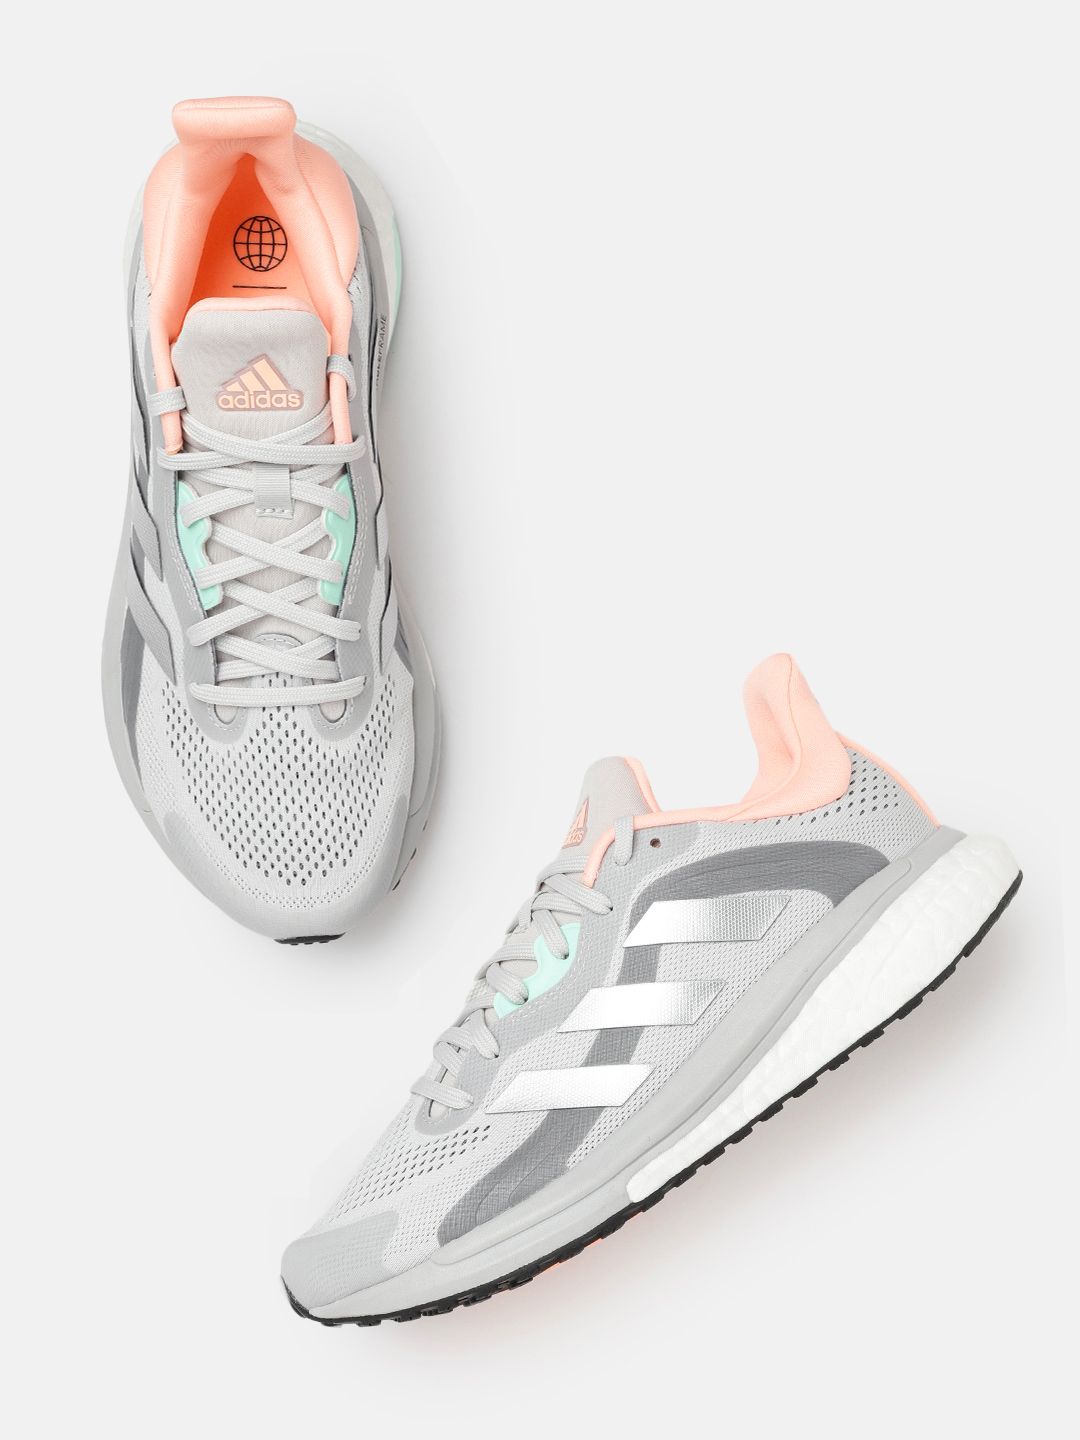 ADIDAS Women Grey & Peach-Coloured Woven Design Solar Glide 4 ST Running Shoes Price in India